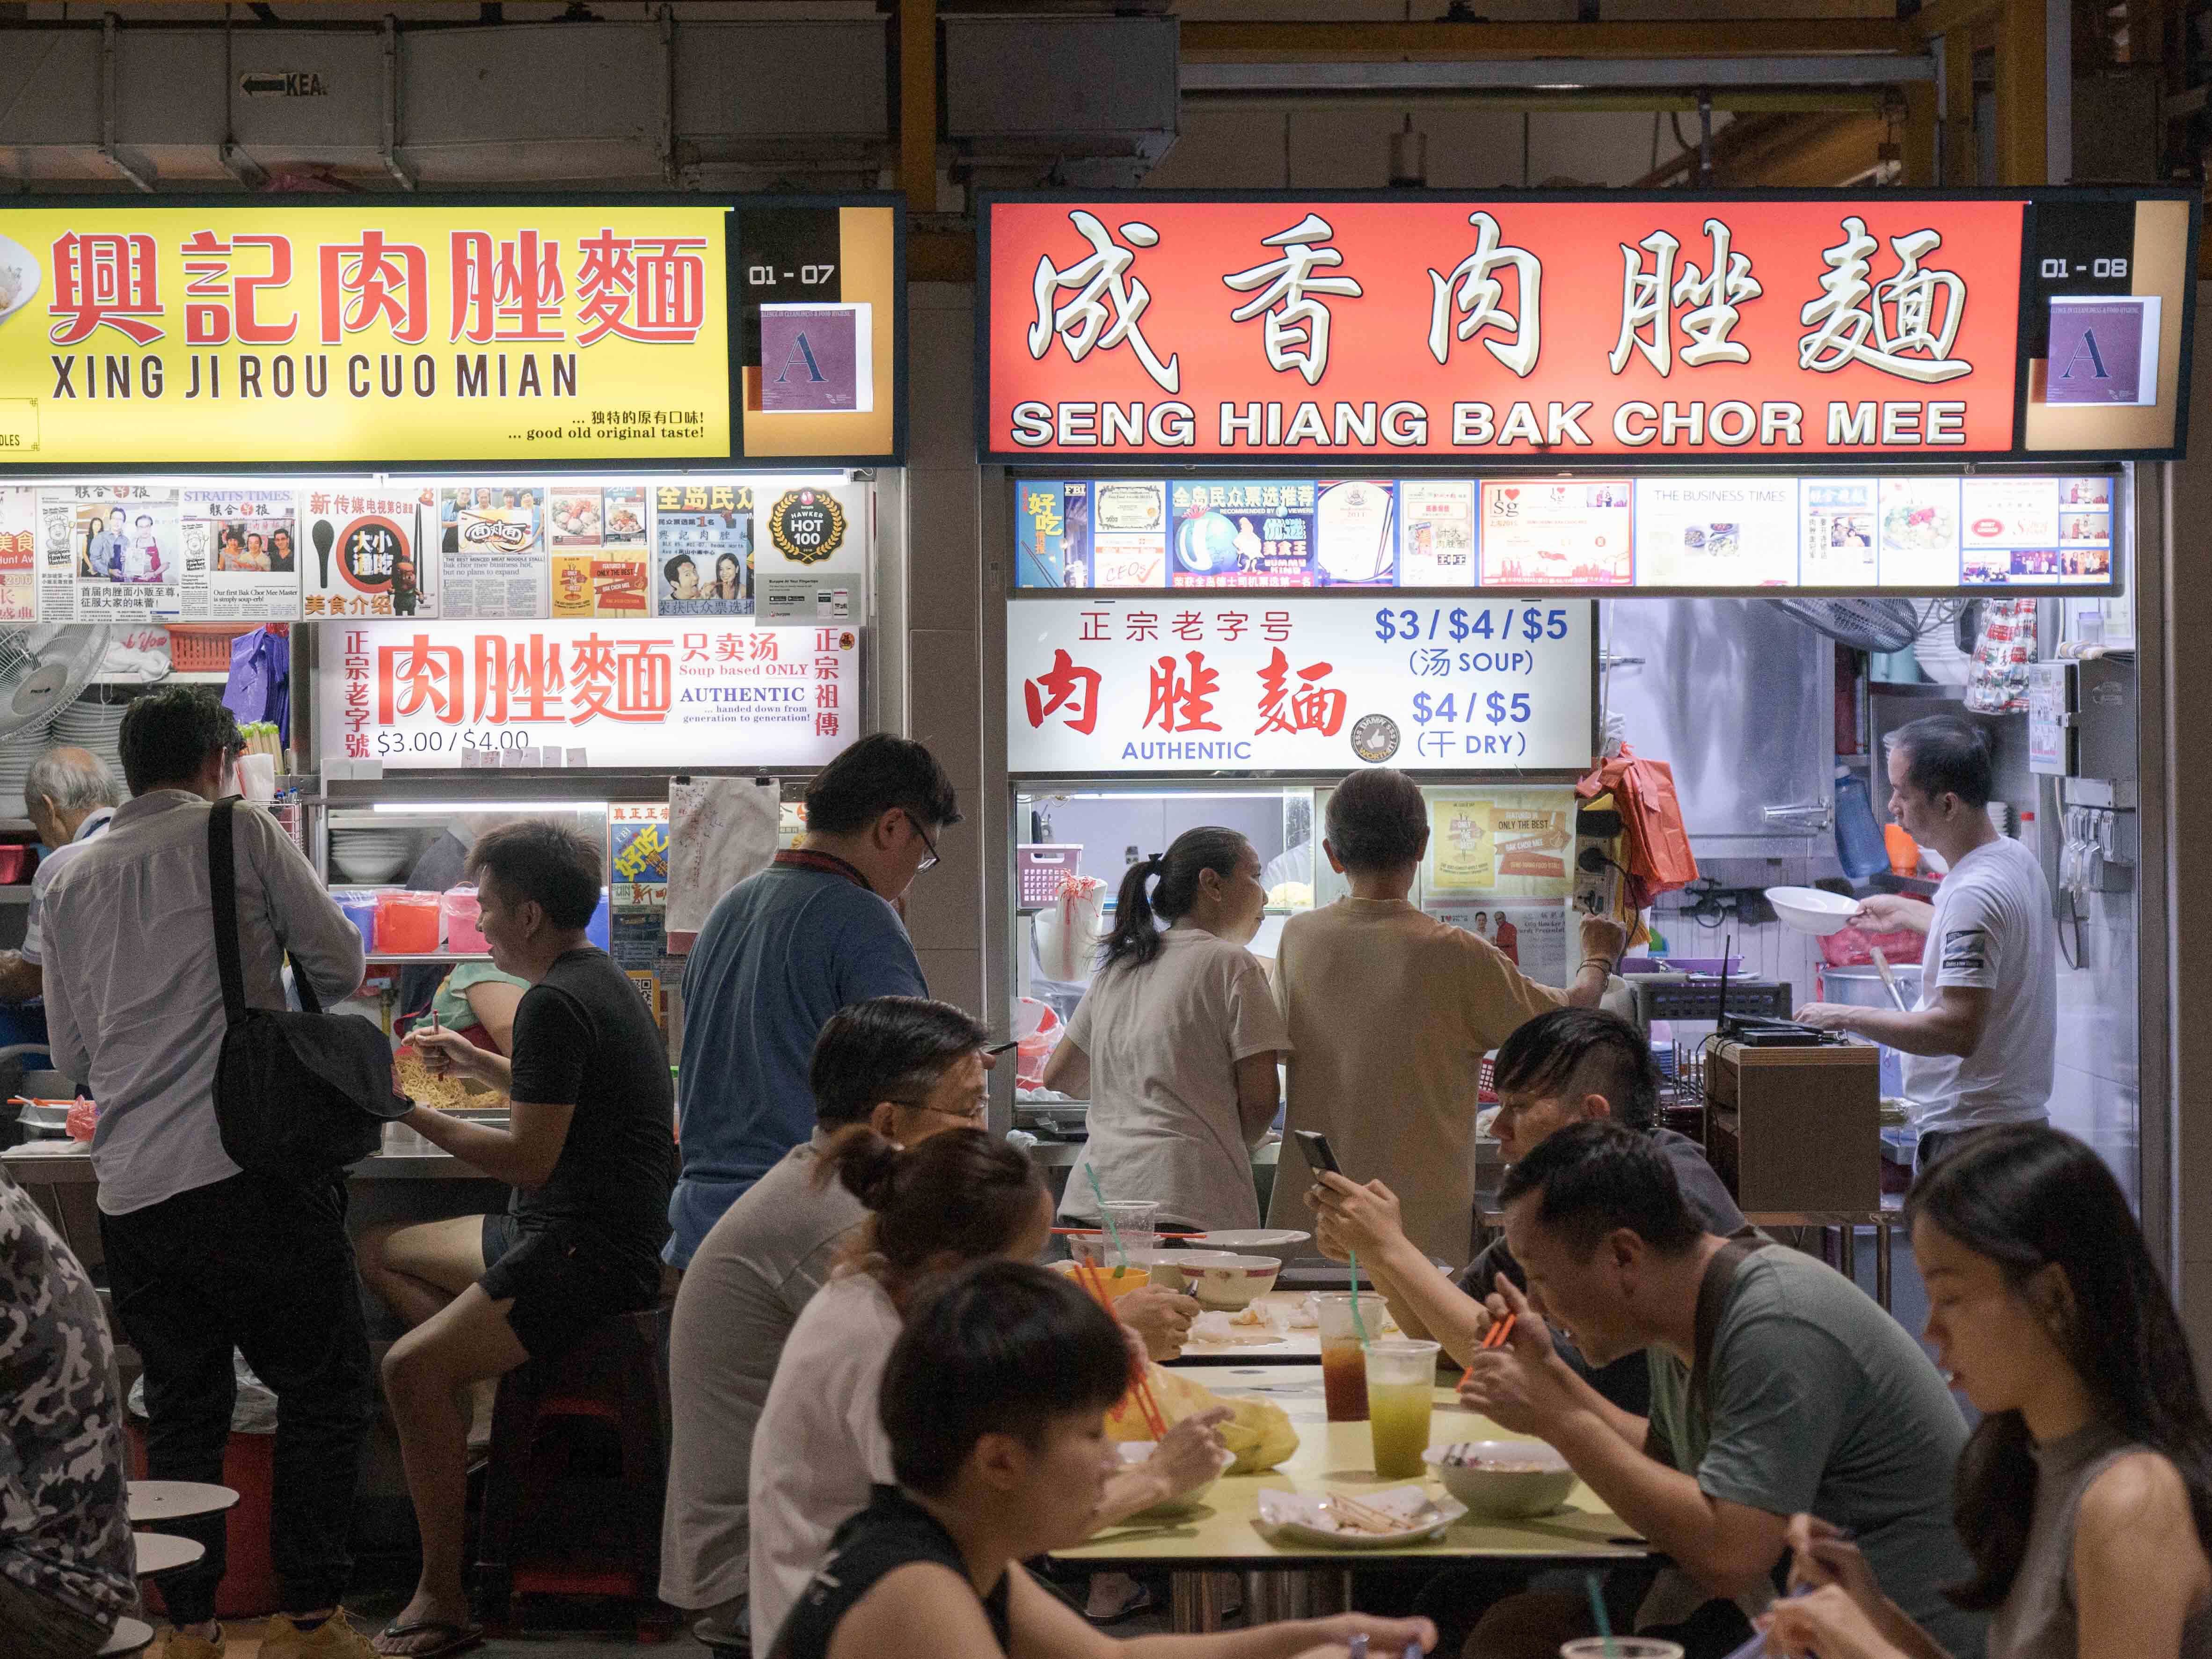 We Love Diversity in Hawker Food. Why Can’t We Do the Same for Society?